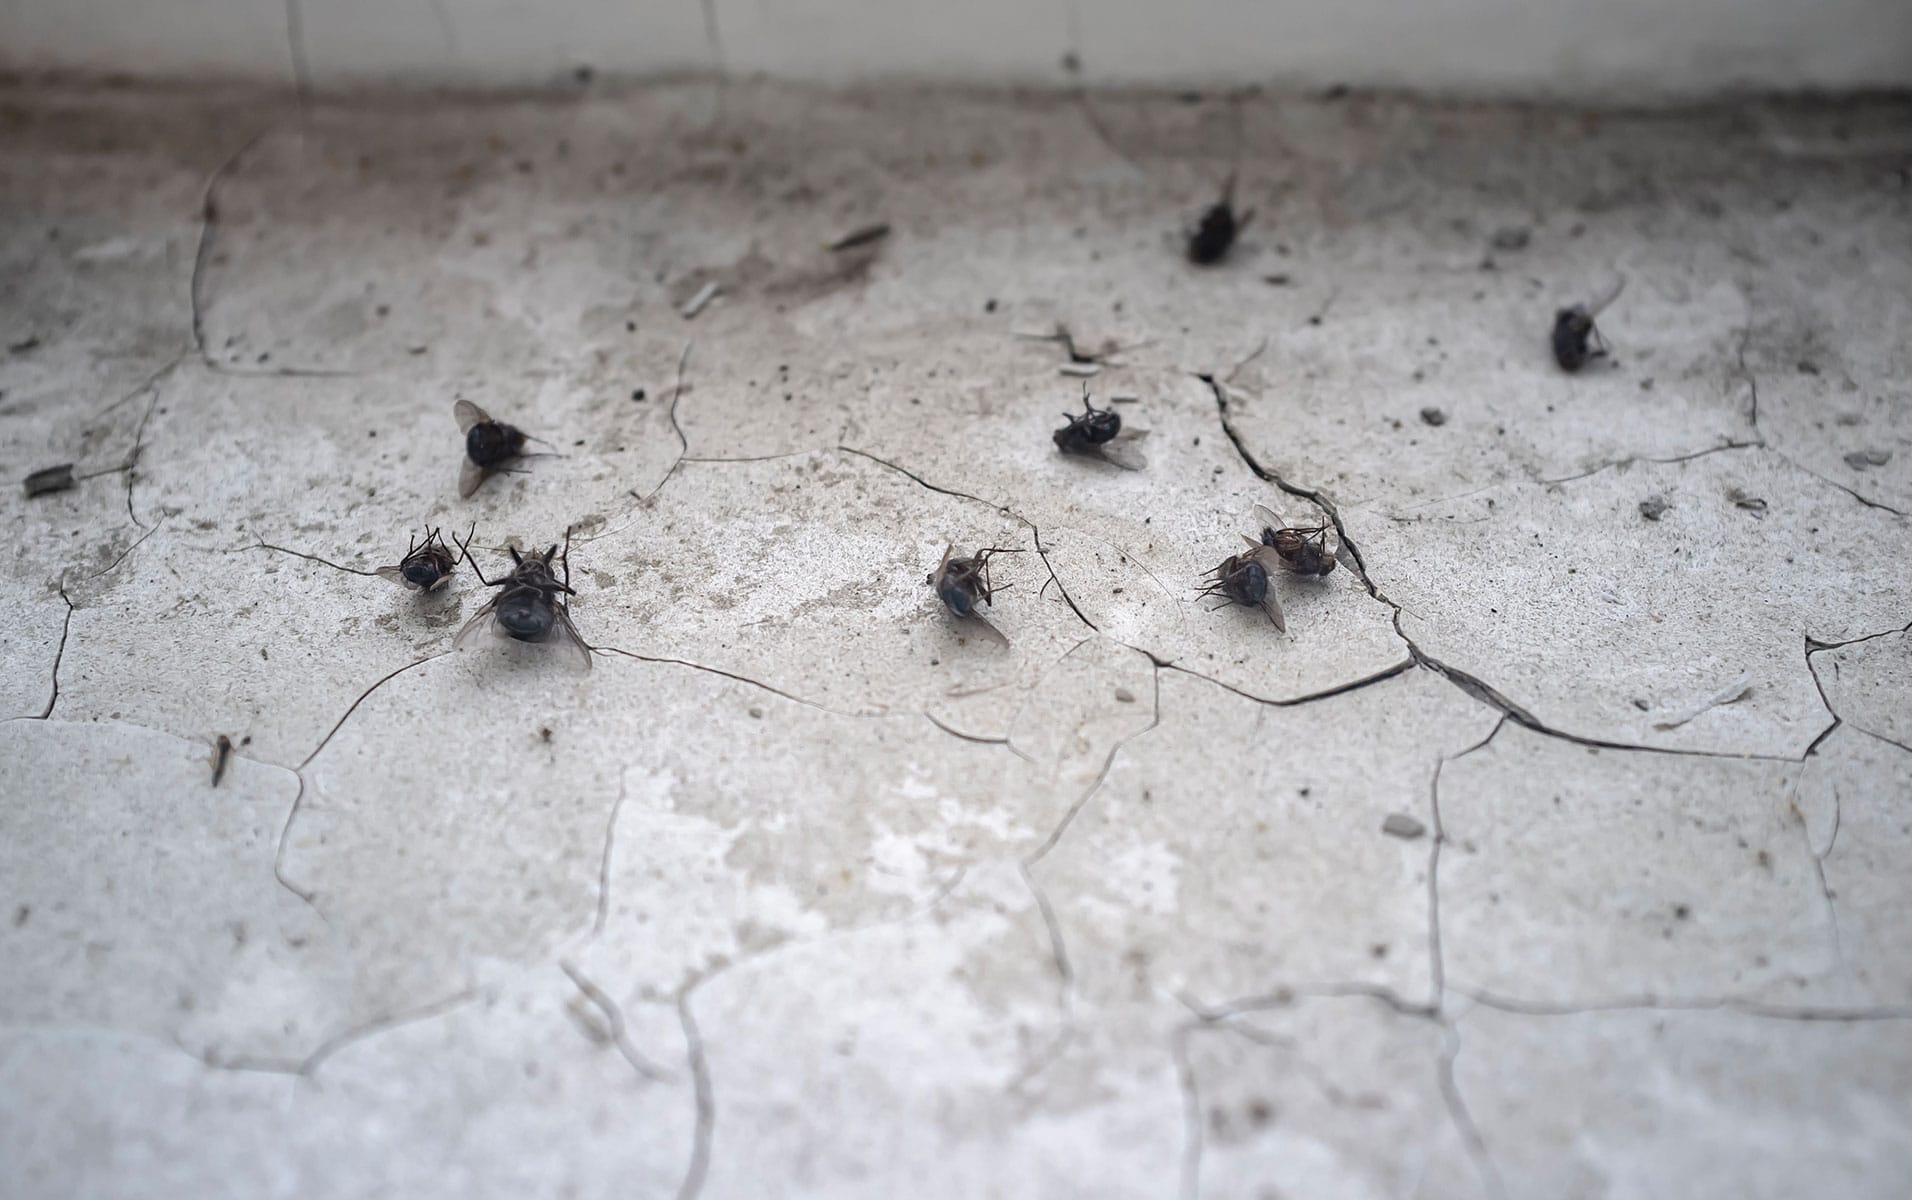 dead flies on a cracked floor thanks to pest control